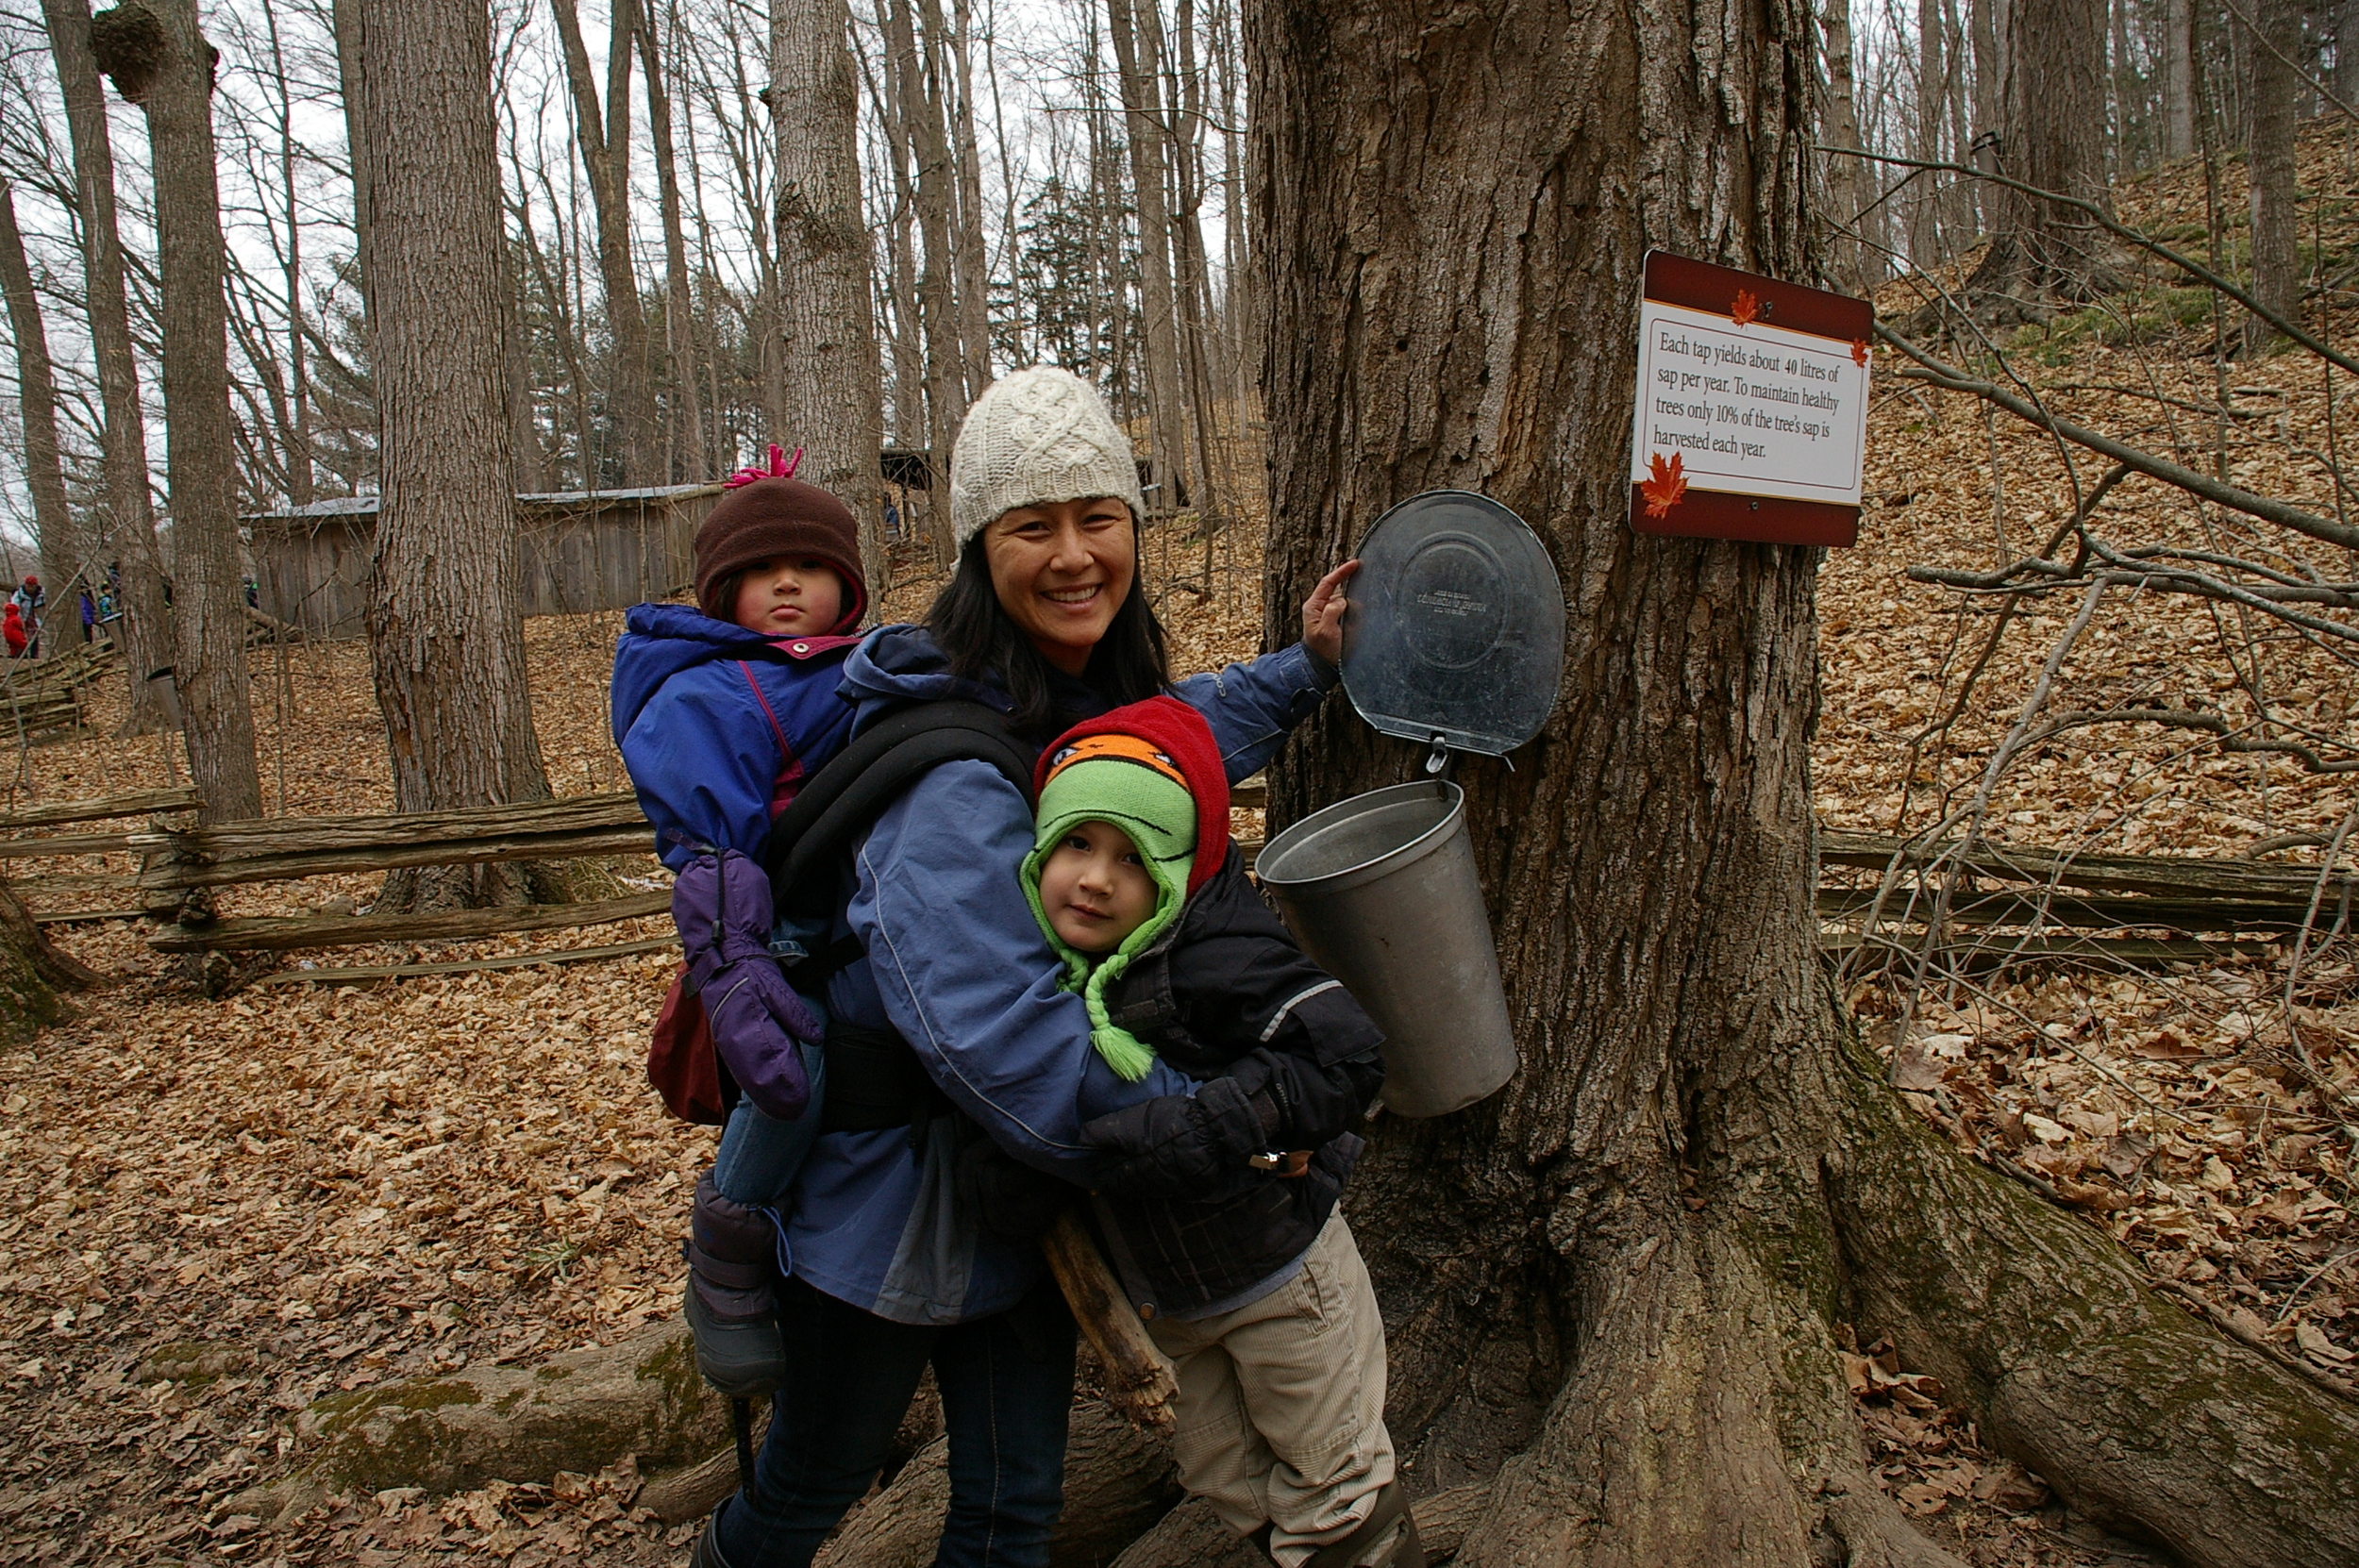 Children and their caregivers on a walk at the maple syrup farm.